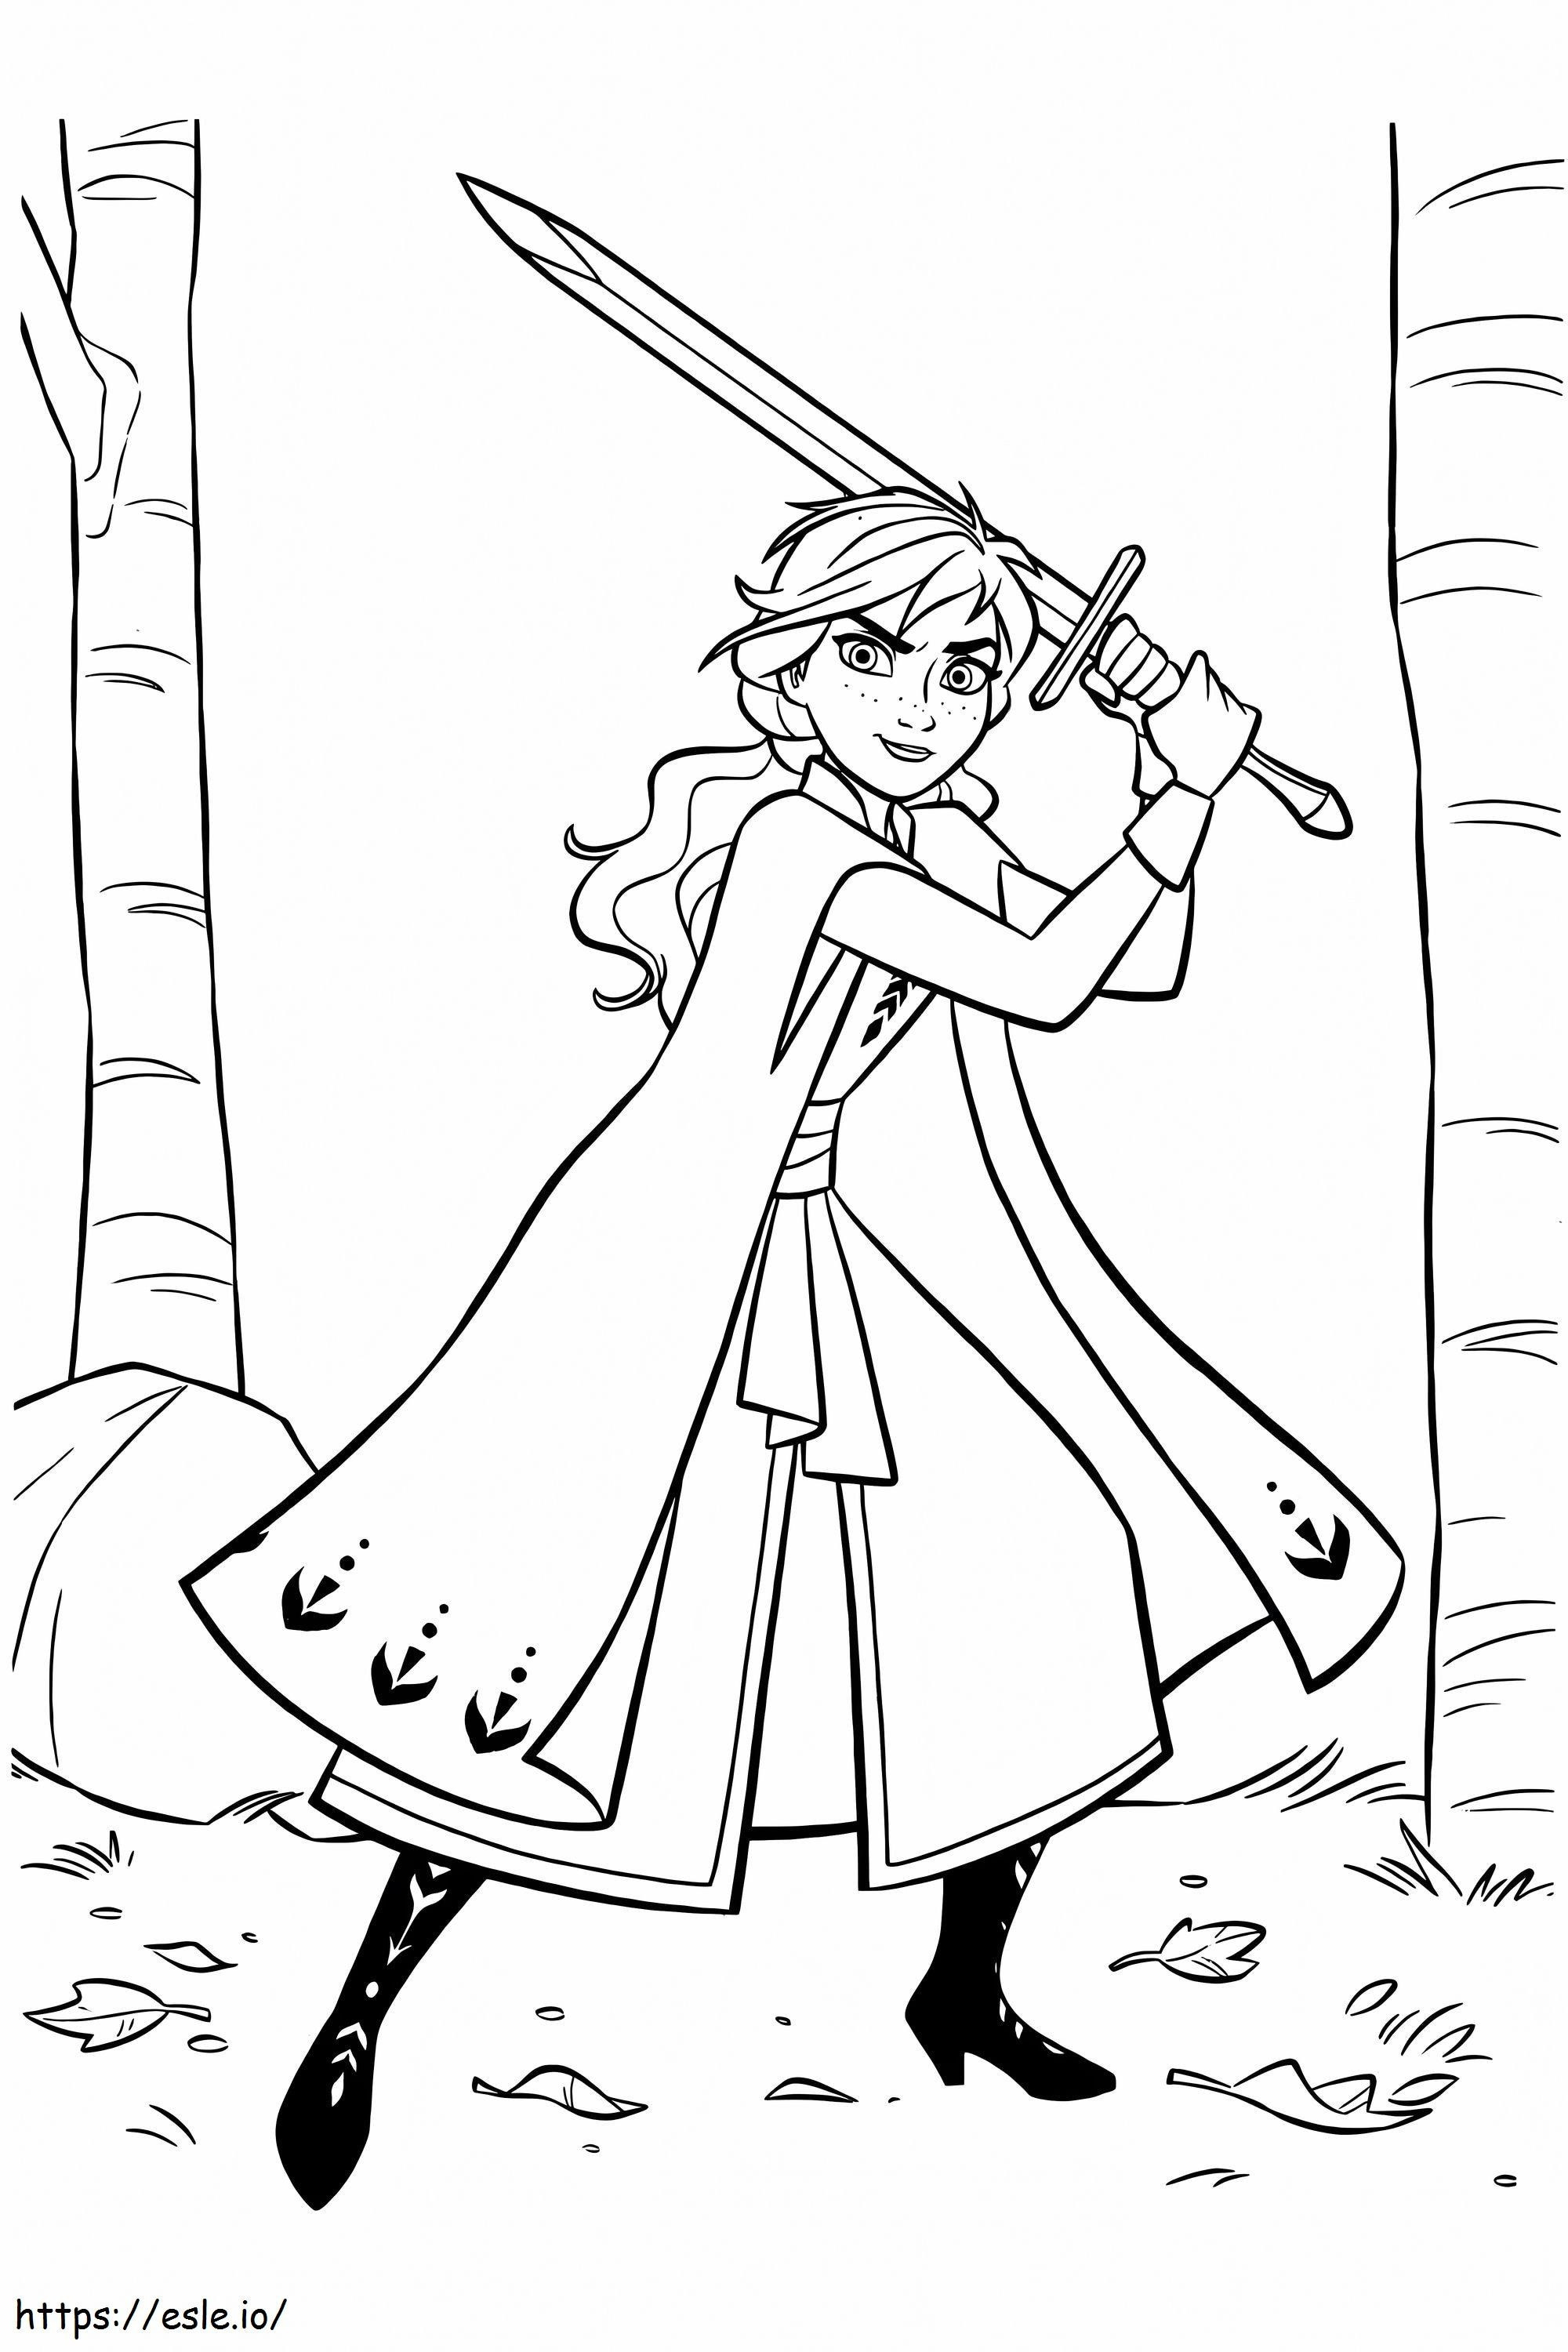 Anna With Sword coloring page